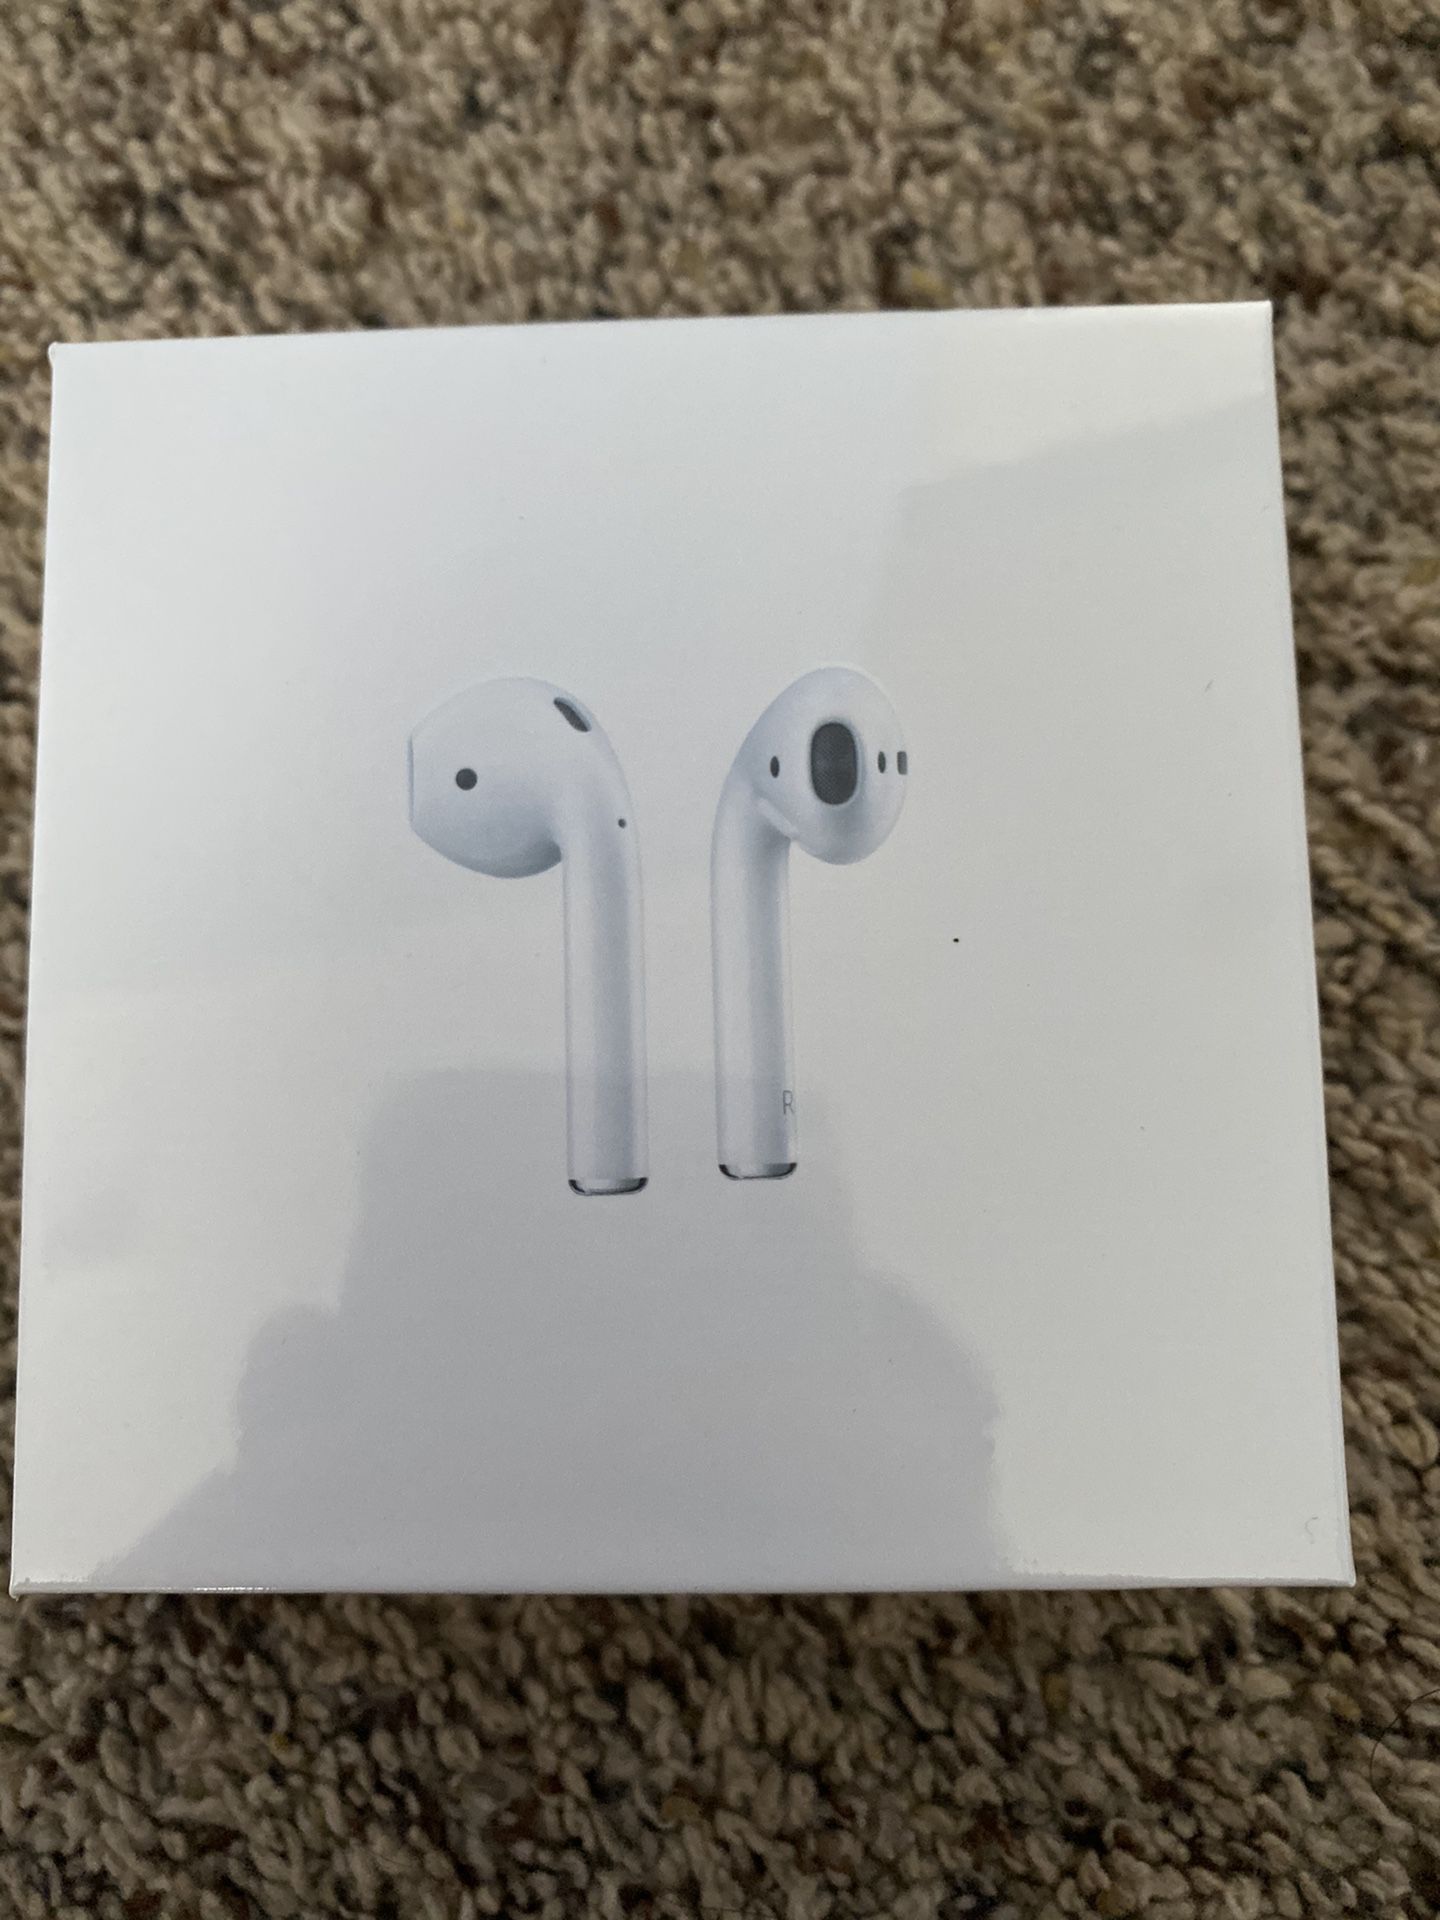 Apple AirPods 2nd Generation!!!